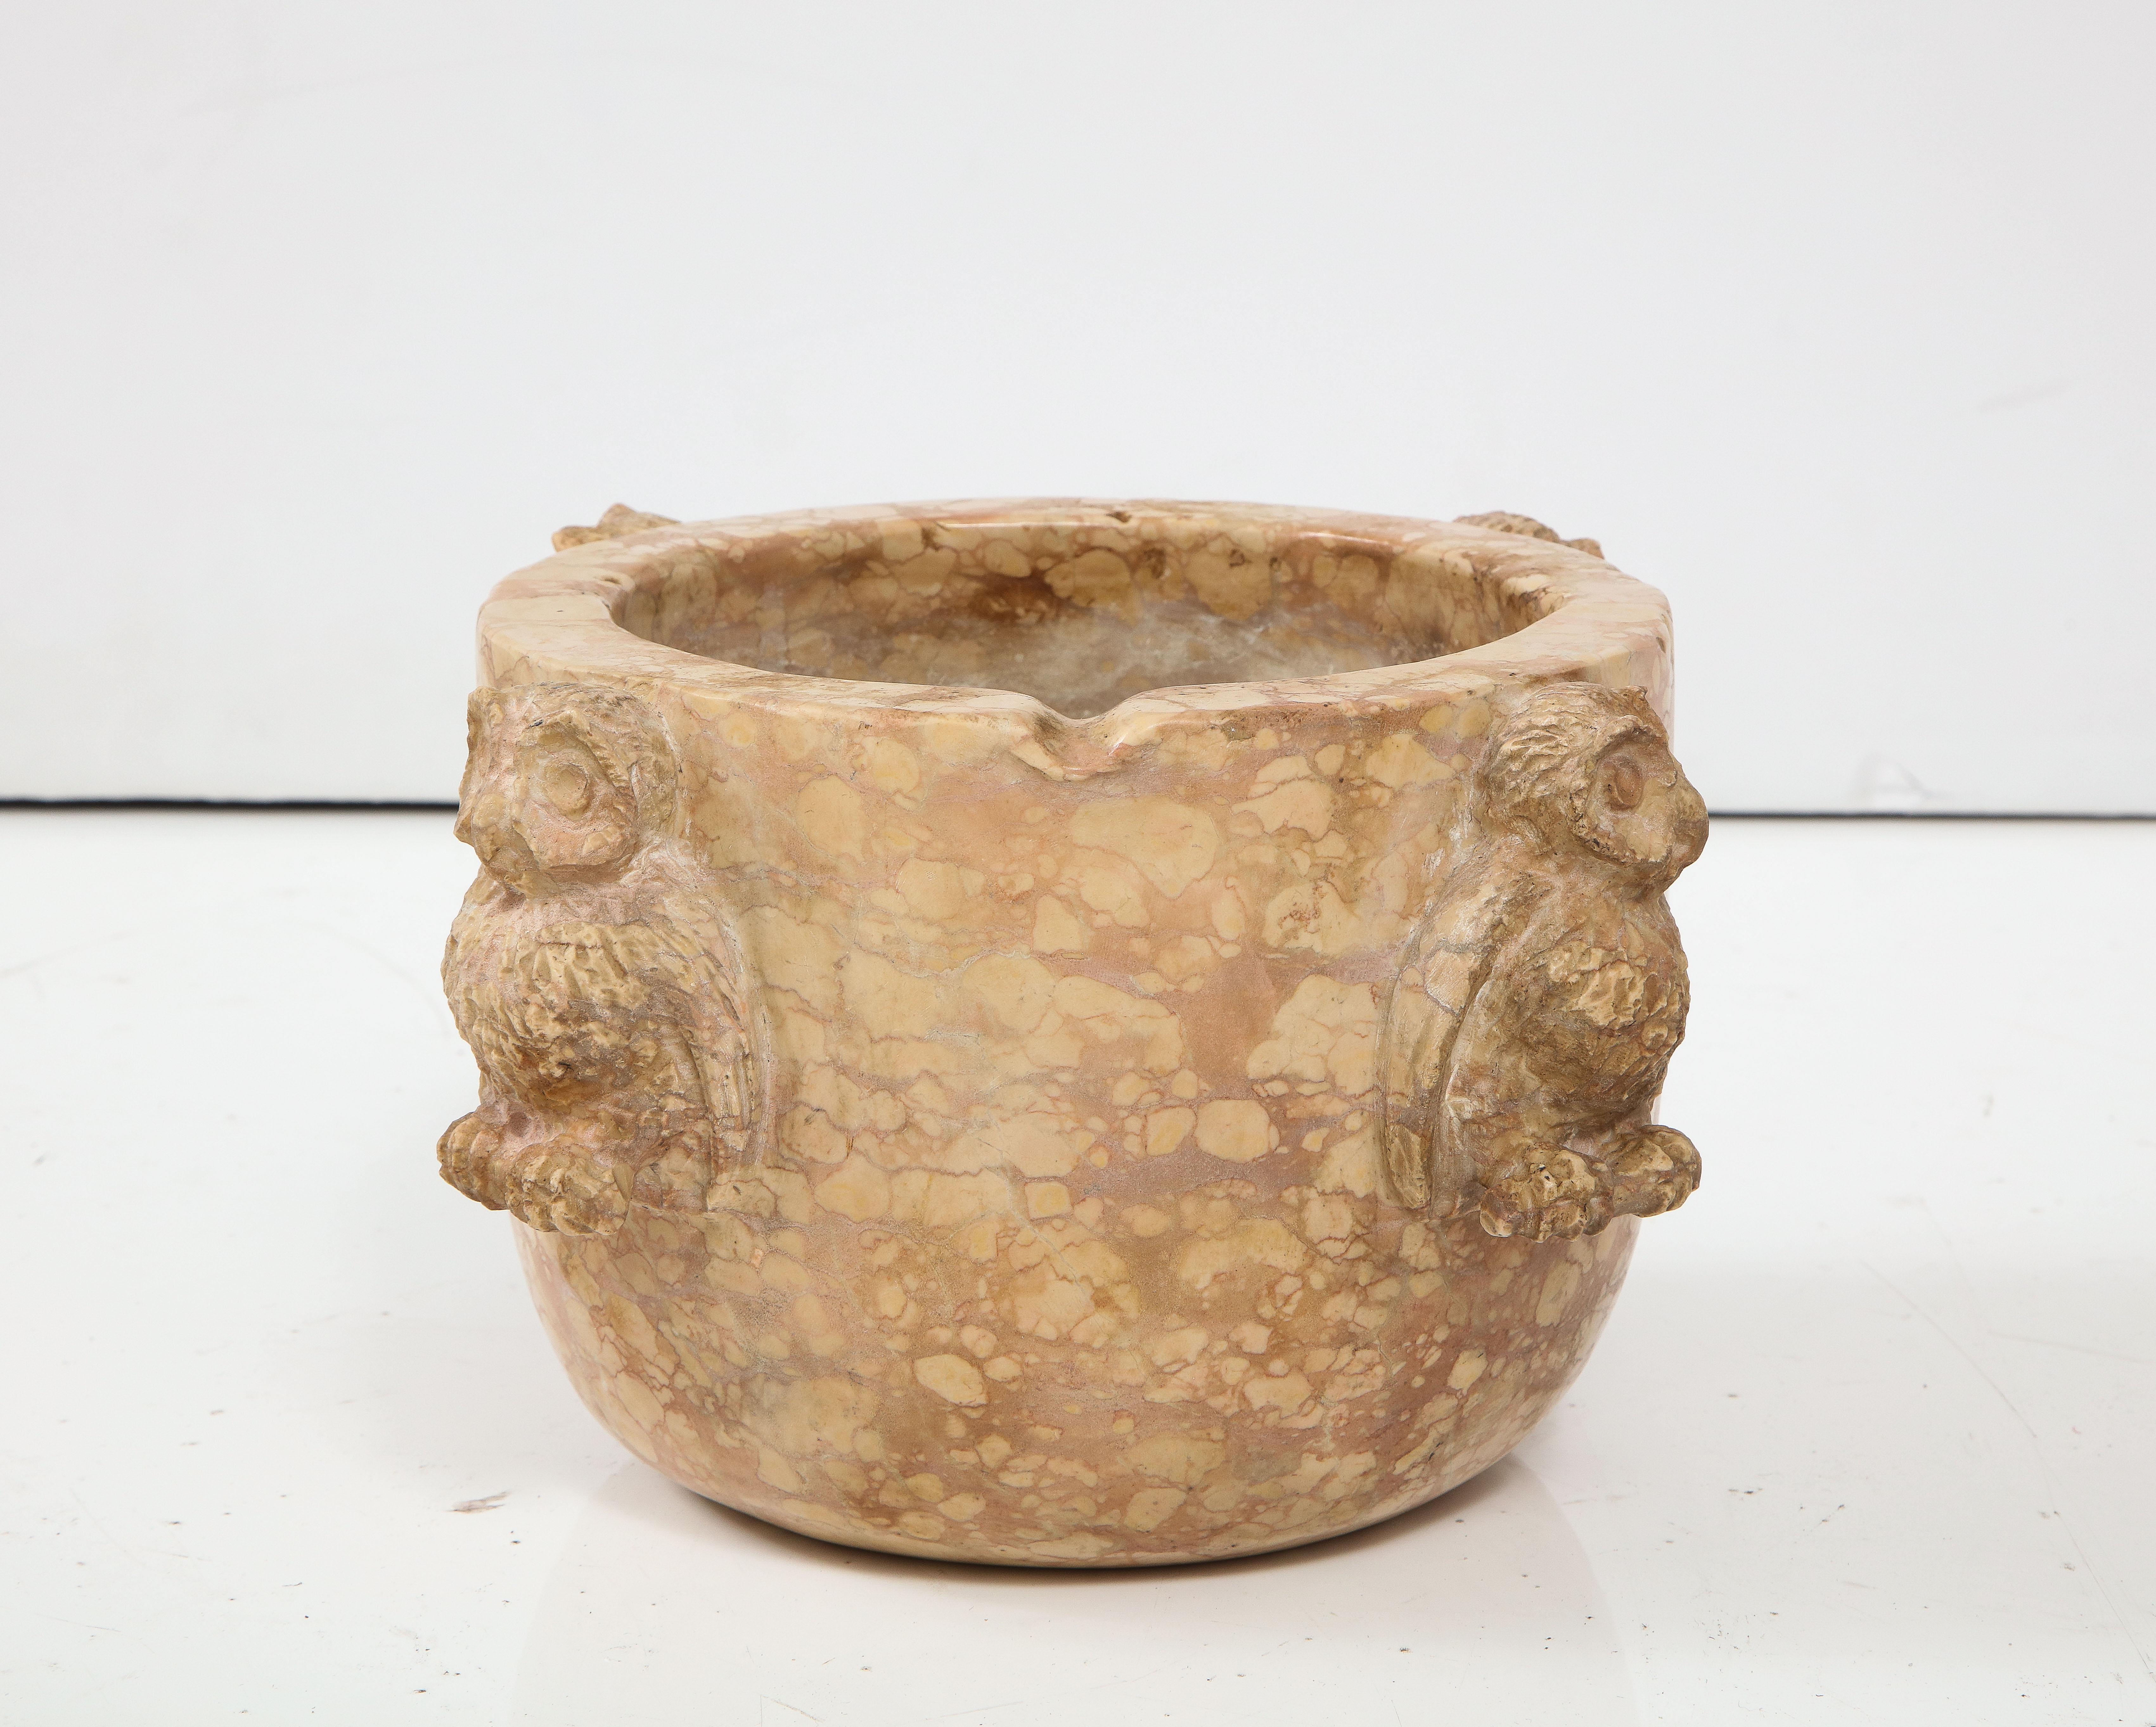 This uniquely beautiful Northern Italian mortar was carved from a solid block of Breccia marble. On each of the sides are four fancifully and intricately carved charming and expressive owls. This is a wonderful example of an everyday object made